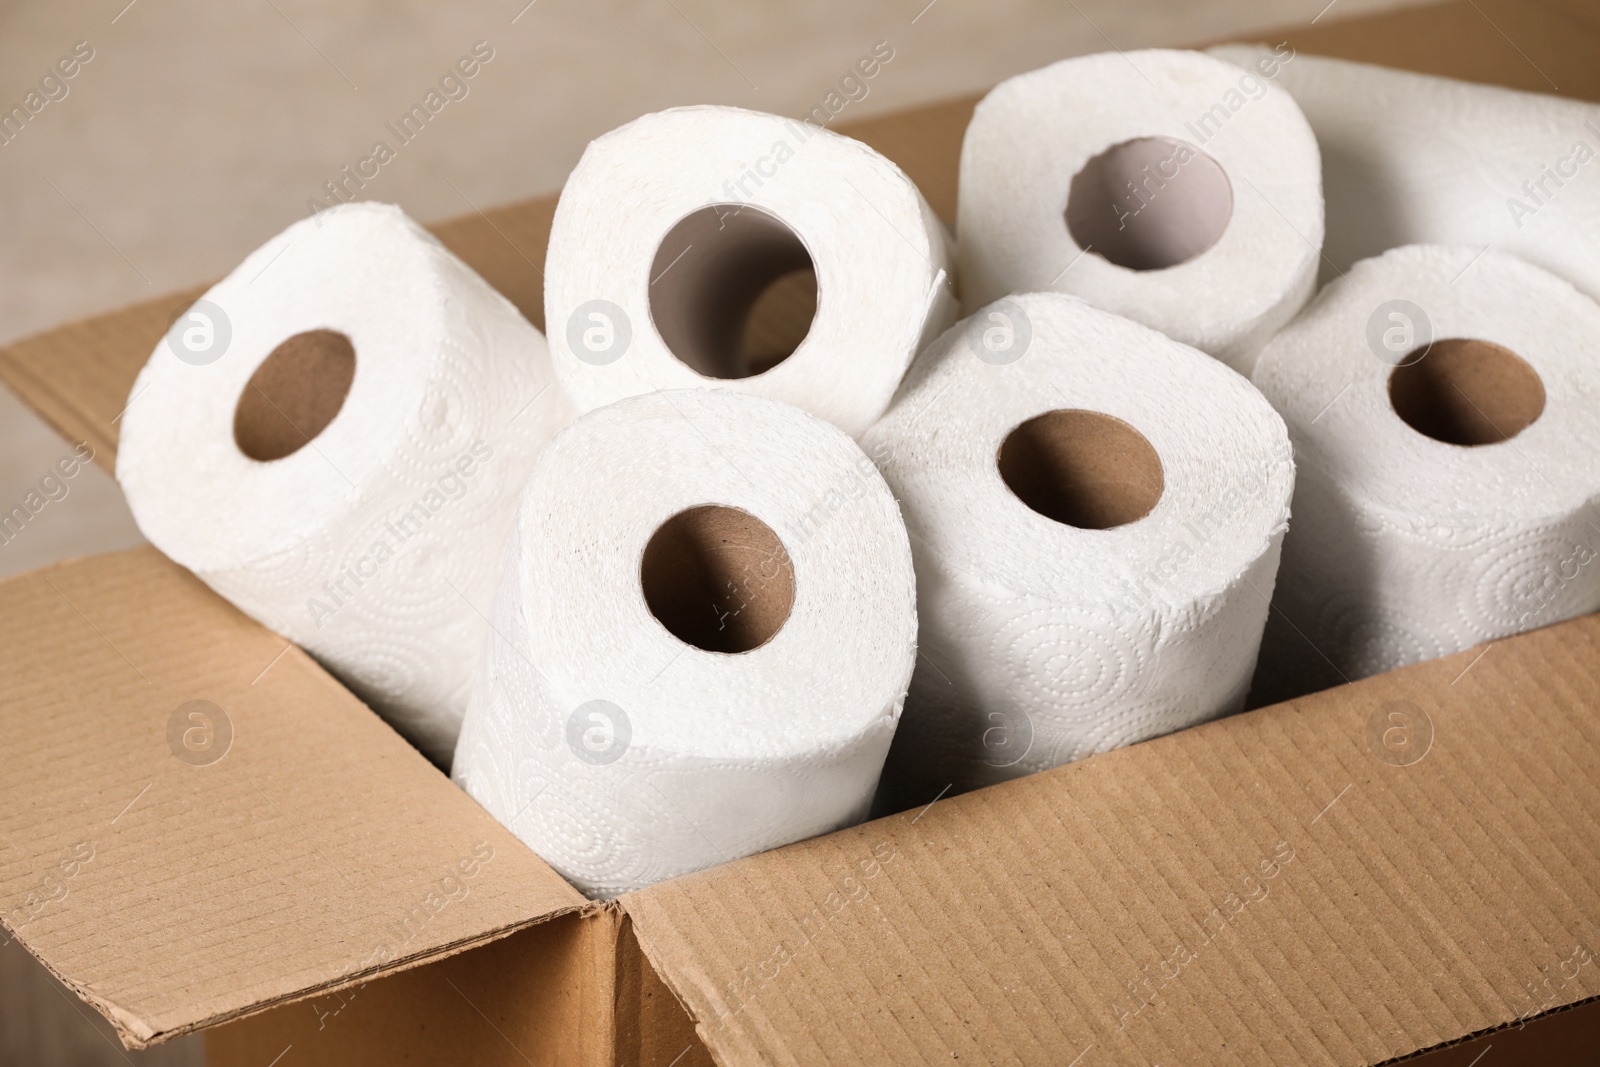 Photo of Rolls of white paper towels in cardboard box